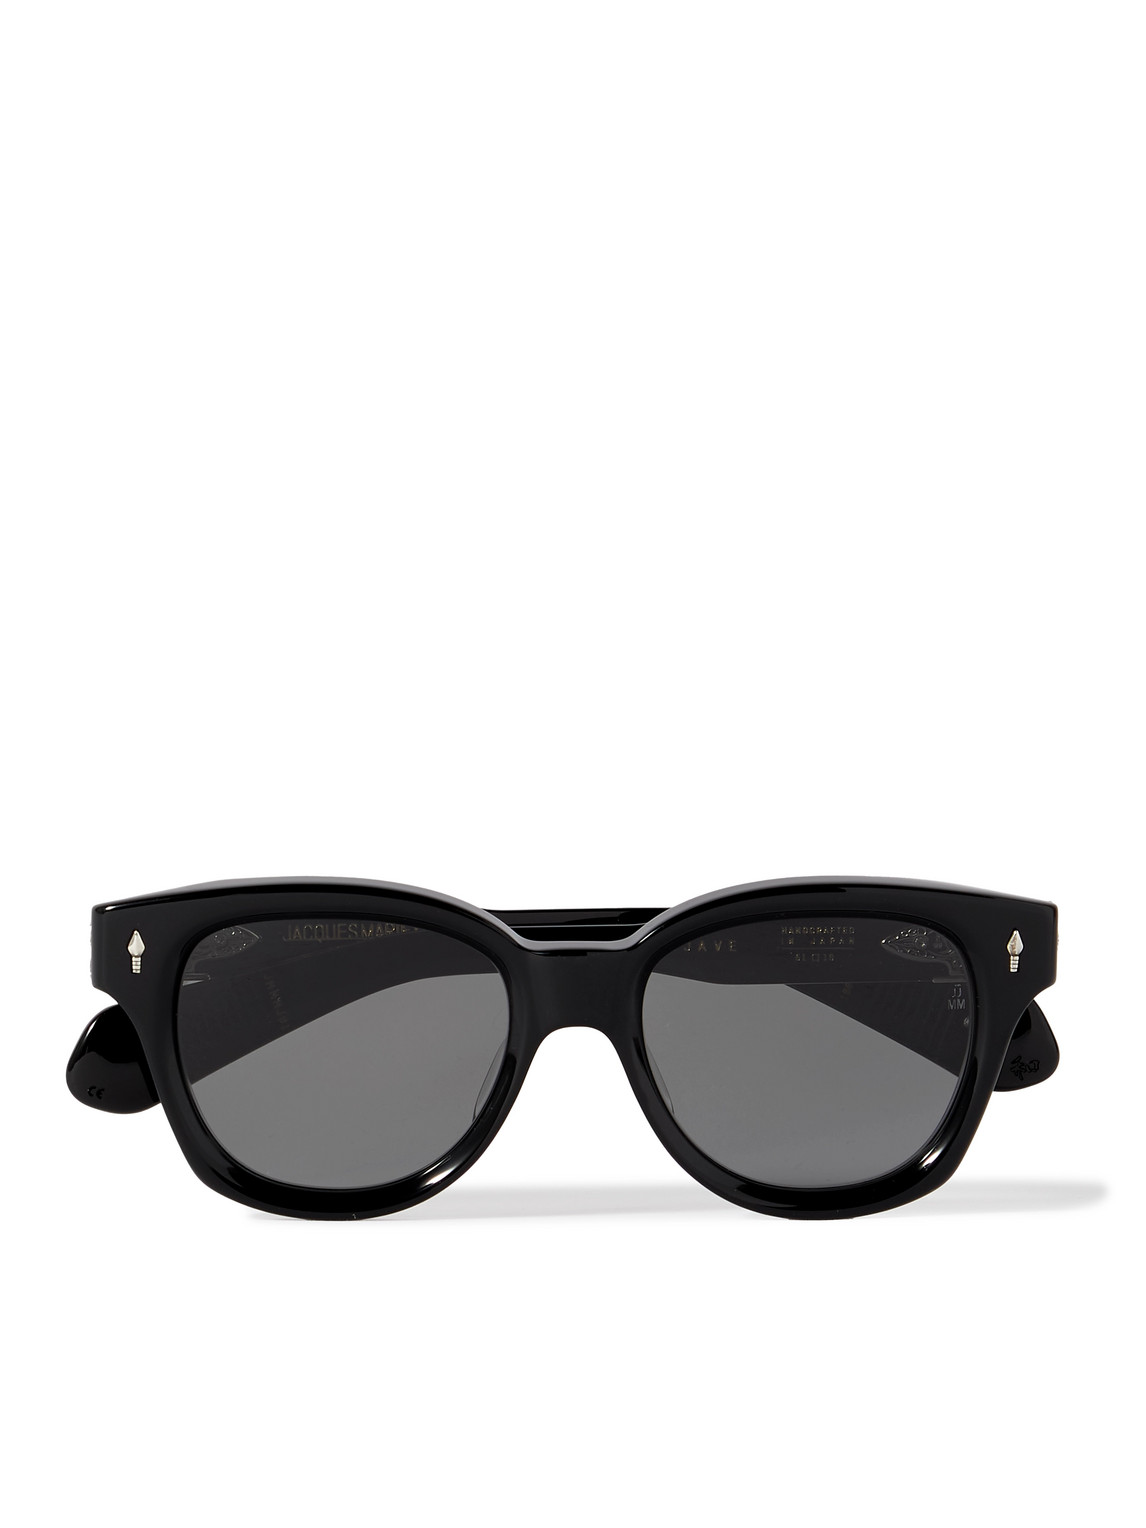 Mojave D-Frame Acetate, Gold and Silver-Tone Sunglasses